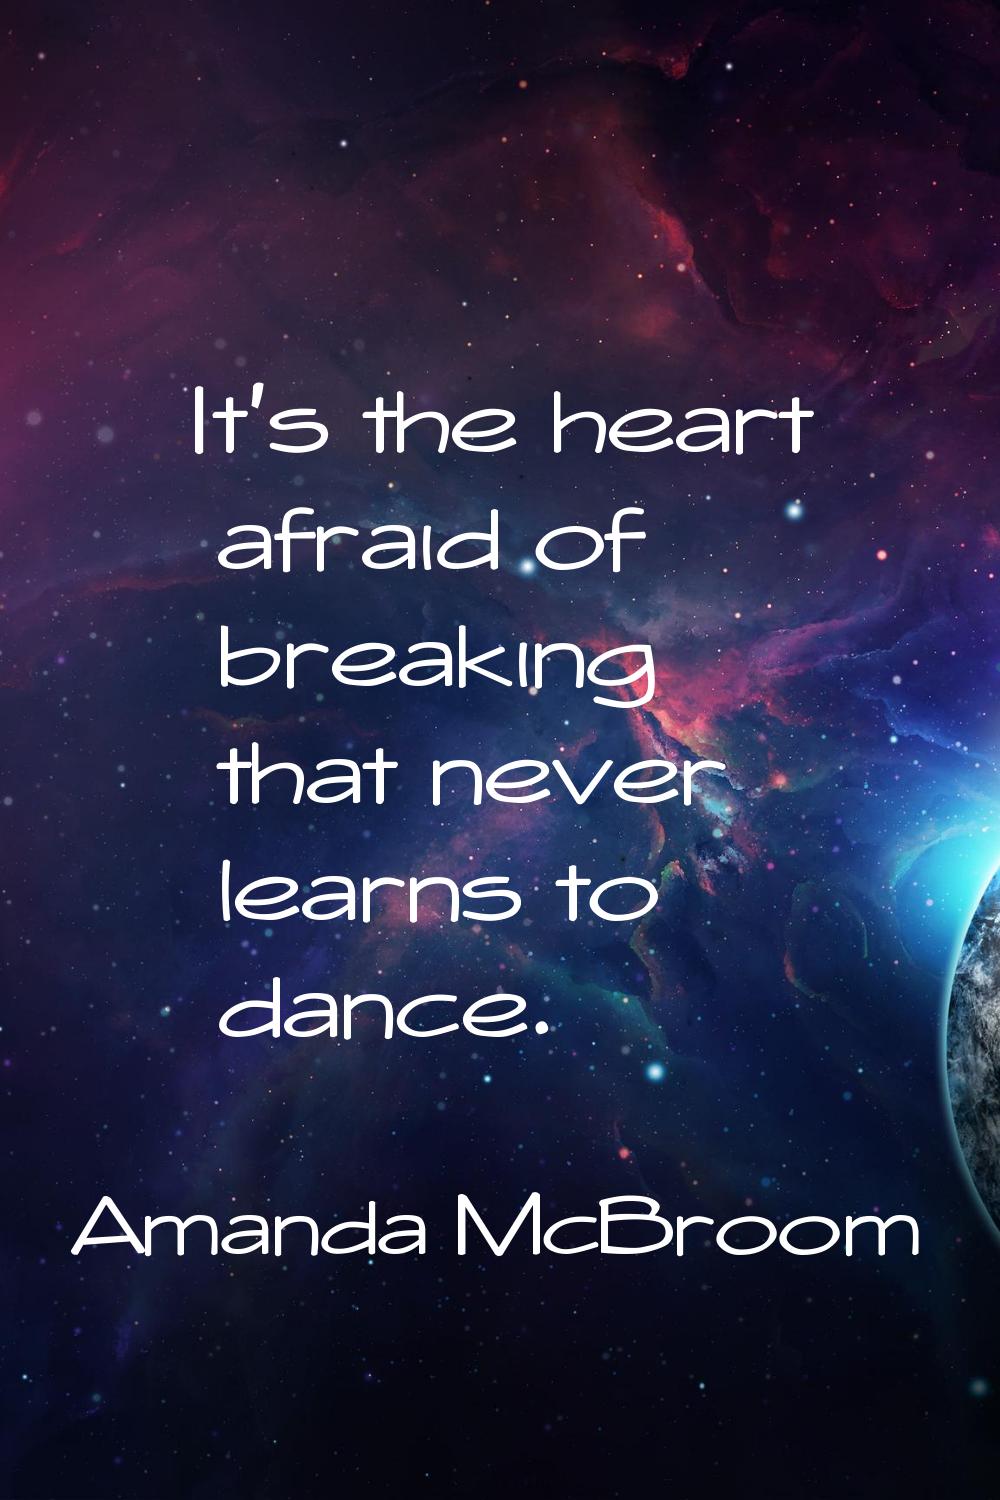 It's the heart afraid of breaking that never learns to dance.